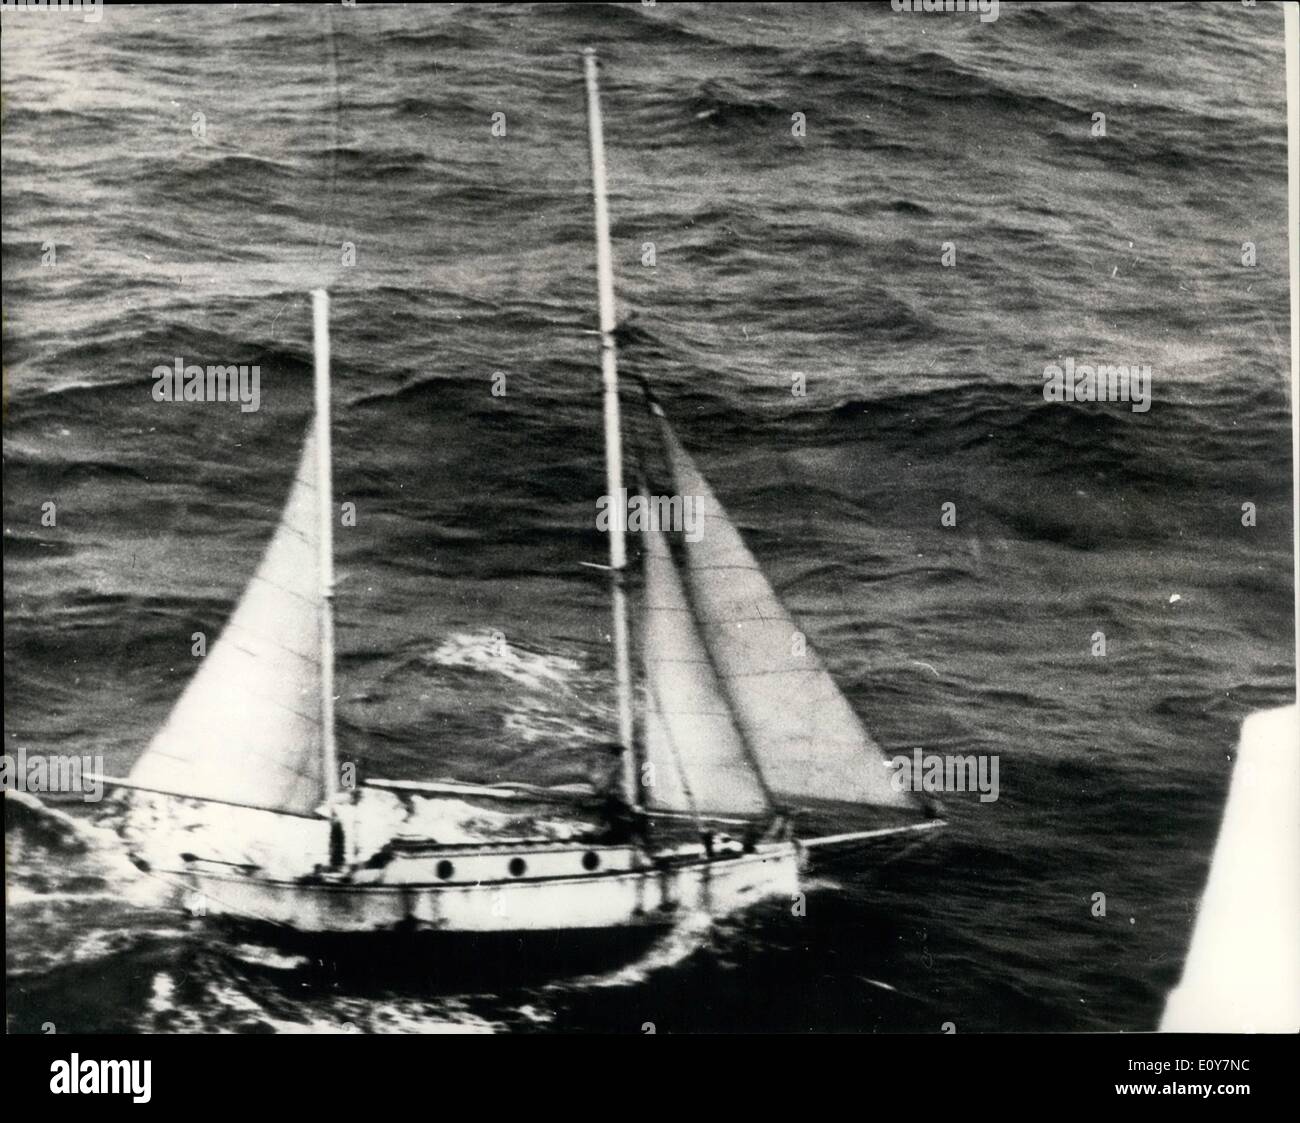 Apr. 04, 1969 - Robin the Lone Round - the - World Yachtsman Nears his Journey's end.: Lone round - the - world yachtsman, Robin Knox-Johnston, was heading for Falmouth today and nearing his journey's end. The 30 year old yachtsman's 32-foot ketch Suhail was about 100-miles off lands's End on the last leg of his non-stop voyage round the world. Today he was spending his 309th day of solitary confinement in the craft that has taken him 30,000 miles. It is almost certain that Robin will be the first man home in the race organised by the Sunday Times newspaper Stock Photo